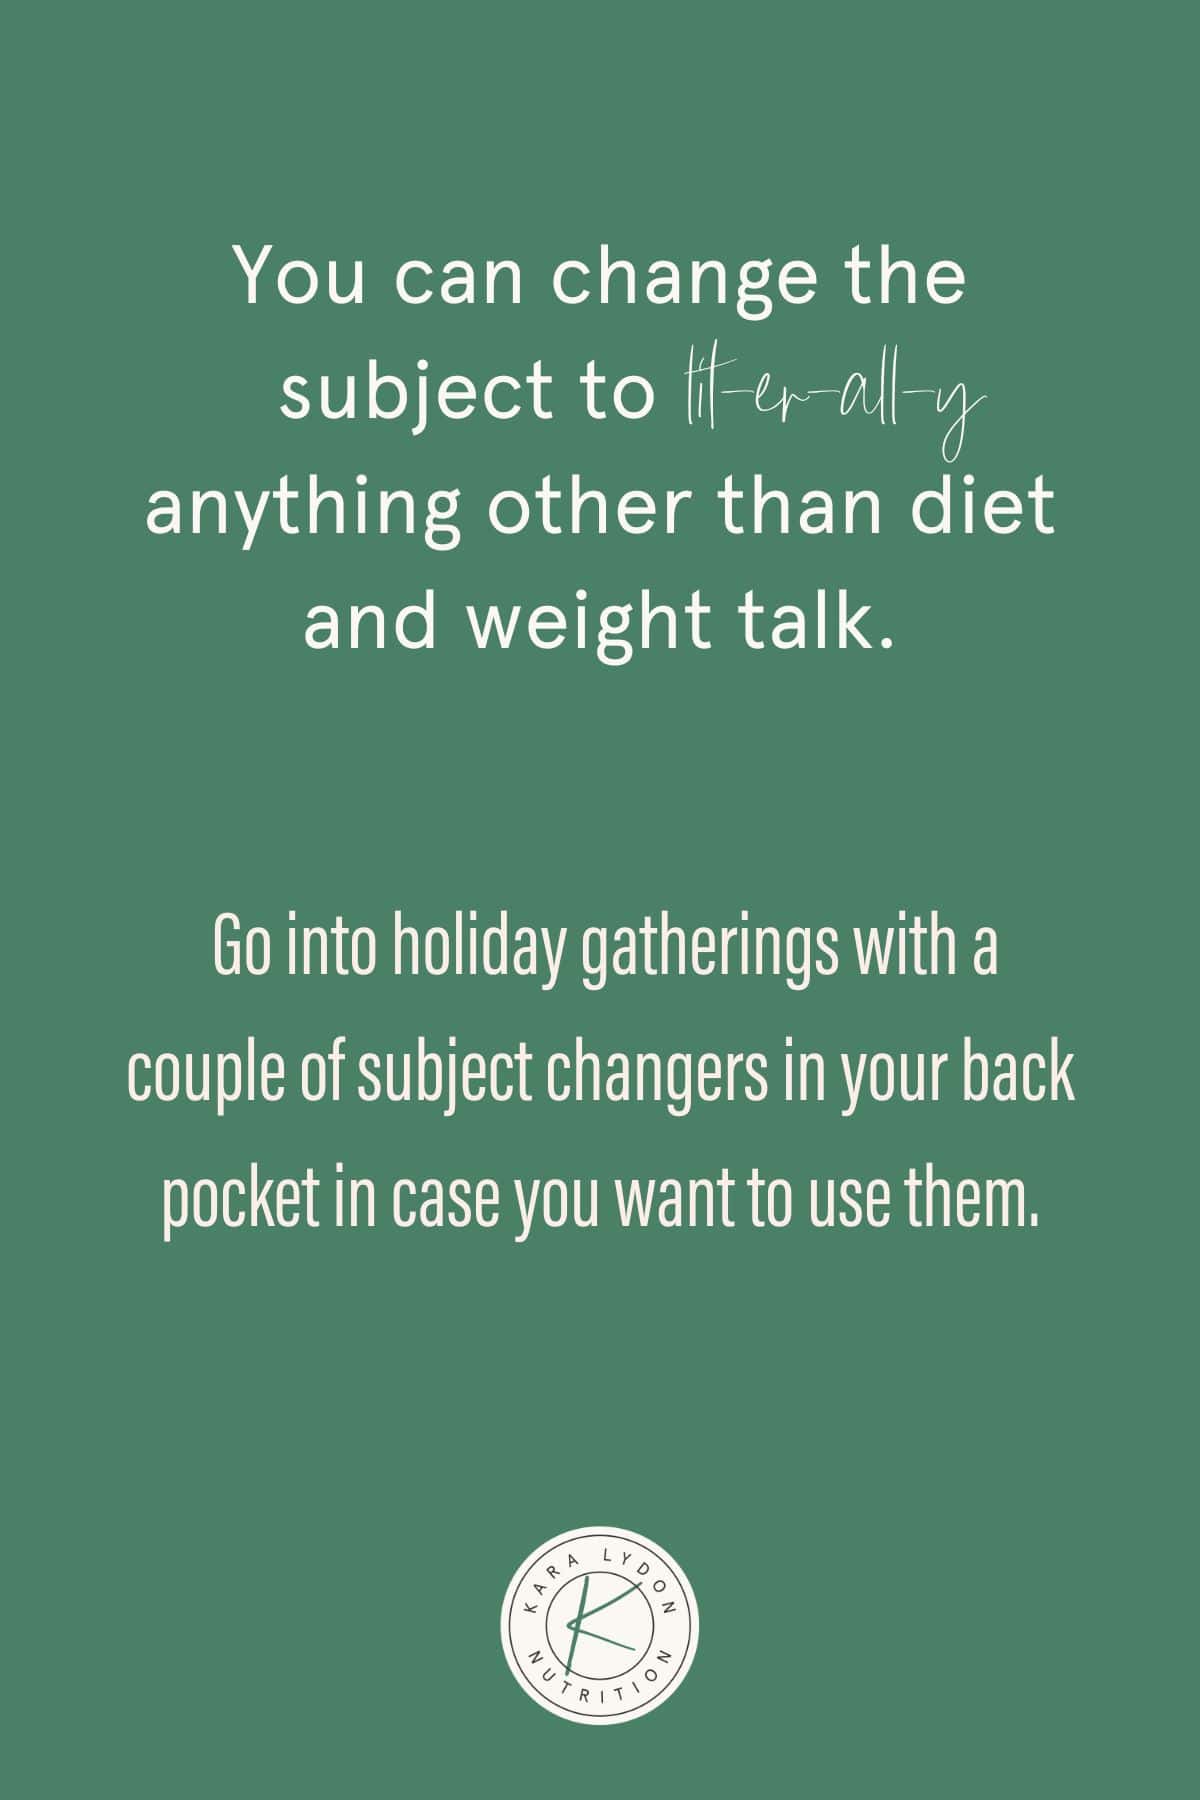 Graphic with quote: "You can change the subject to lit-er-all-y anything other than diet and weight talk. Go into holiday gatherings with a couple of subject changers in your back pocket in case you want to use them."